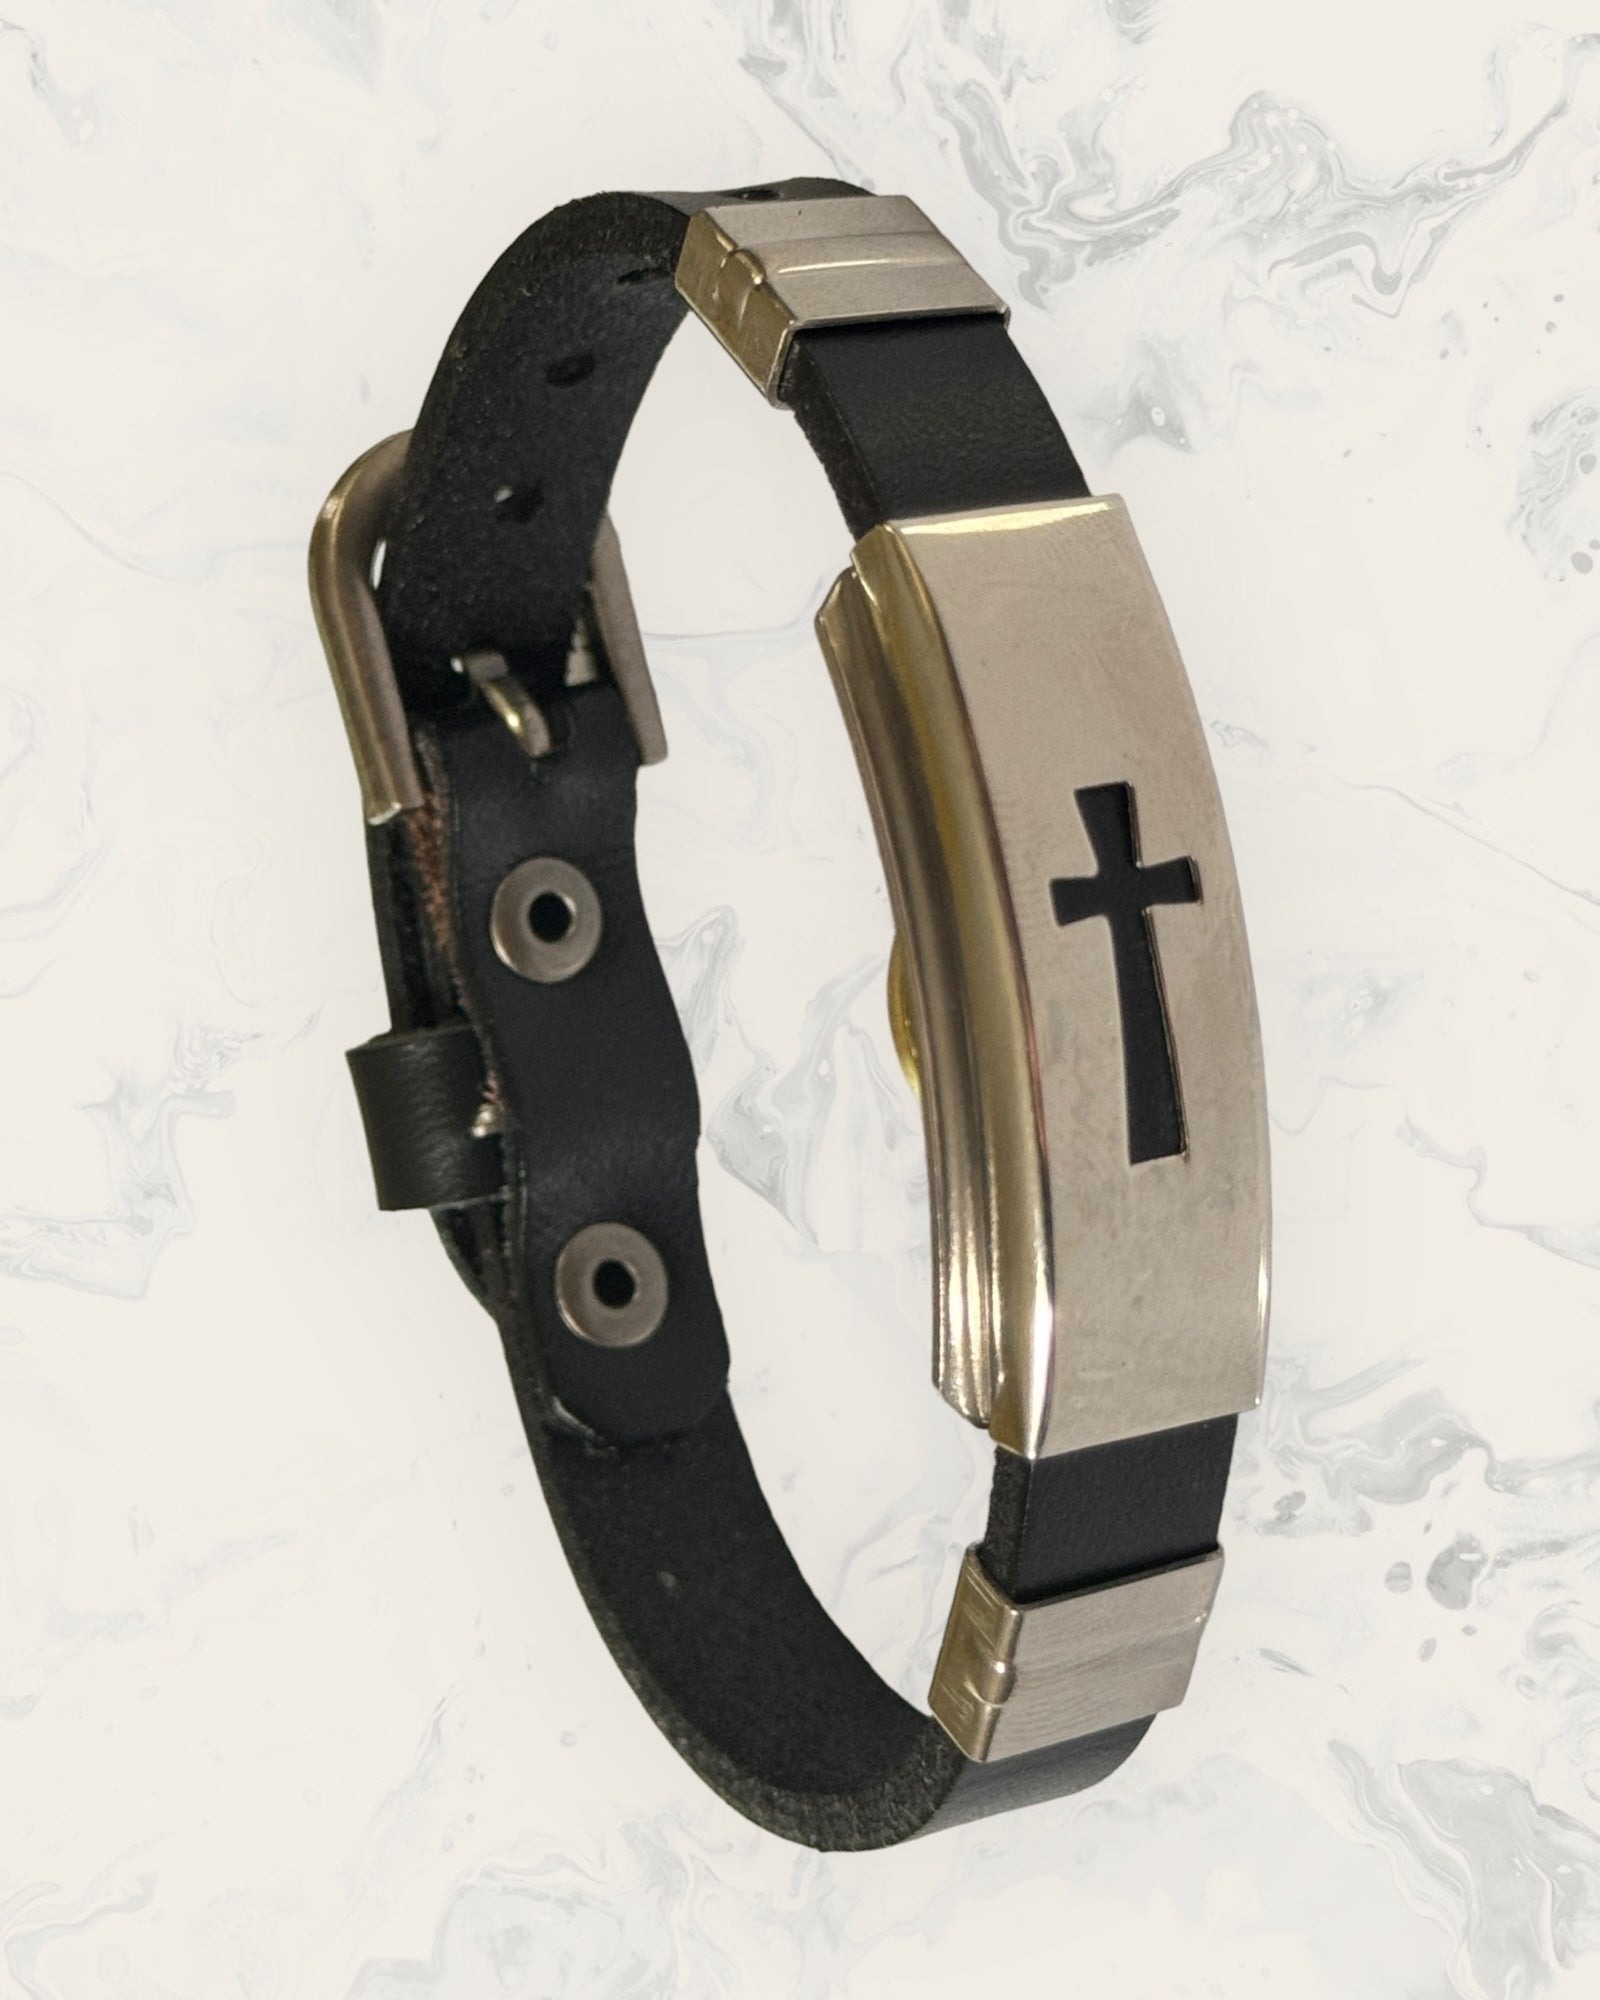 Natural Pain Relief and EMF Protection Bracelet Leather Band Color Black with Cross design on a silver metal slider